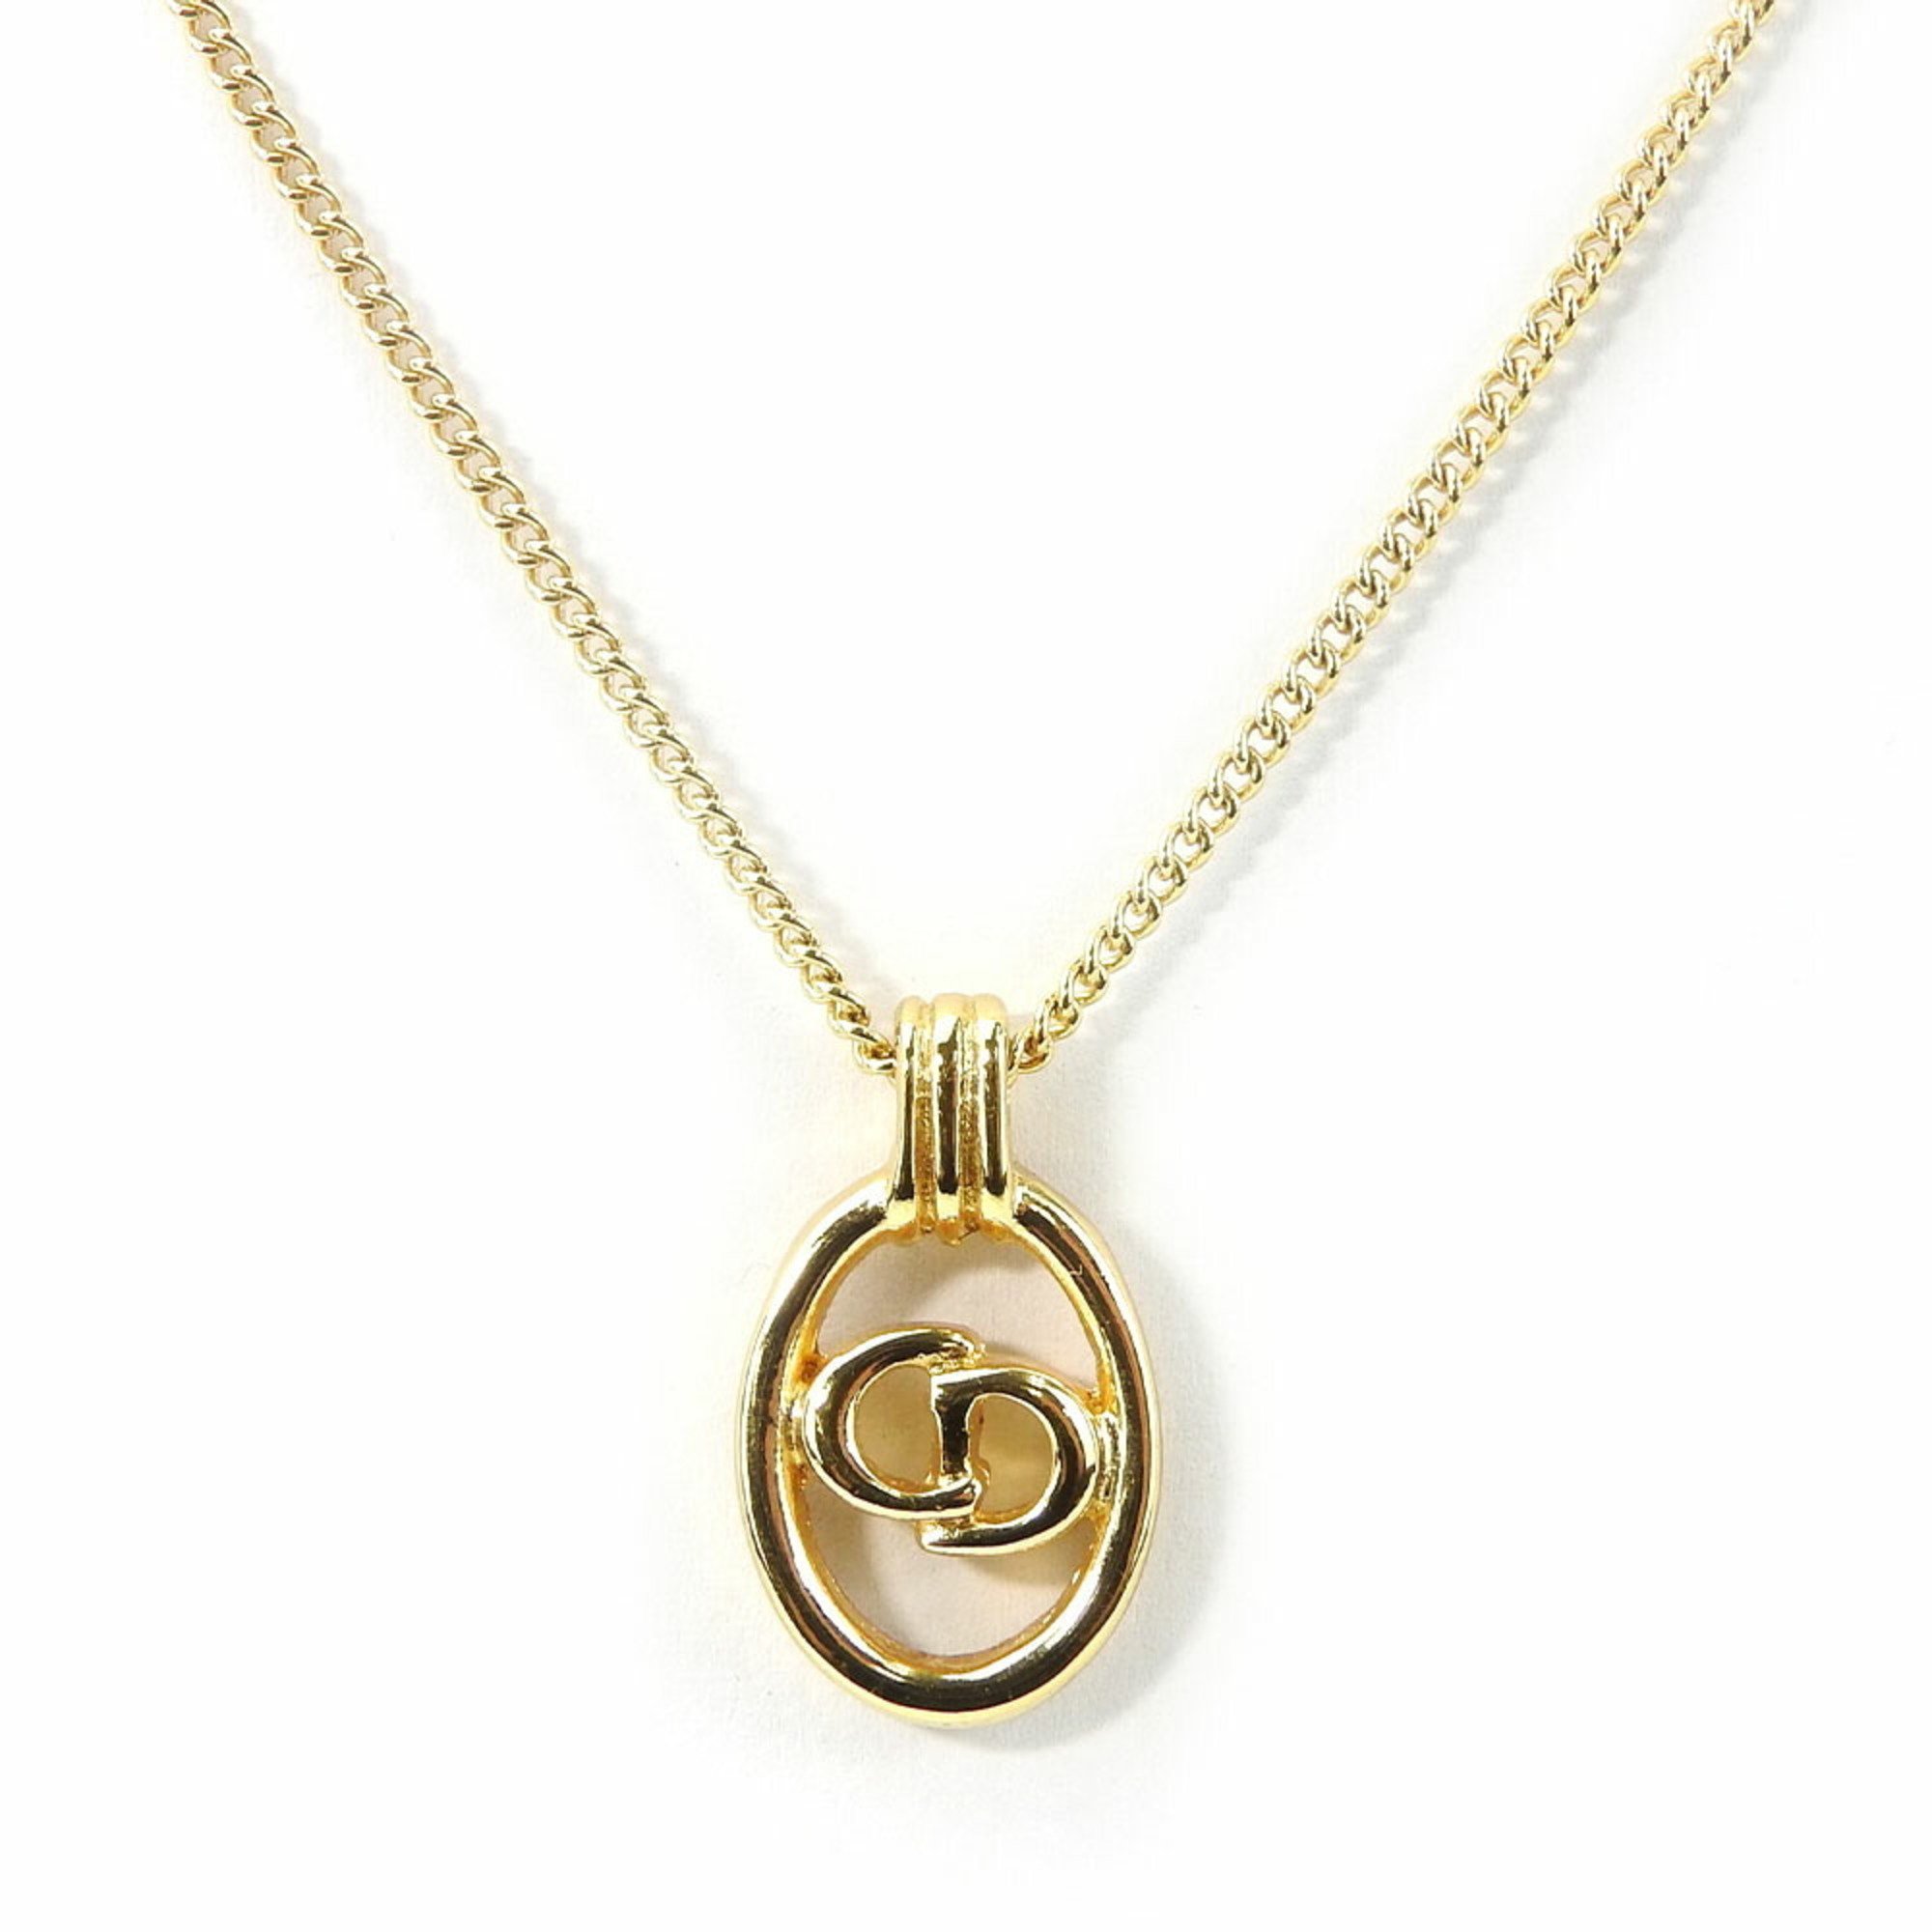 Christian Dior Necklace Metal Gold Plated Women's